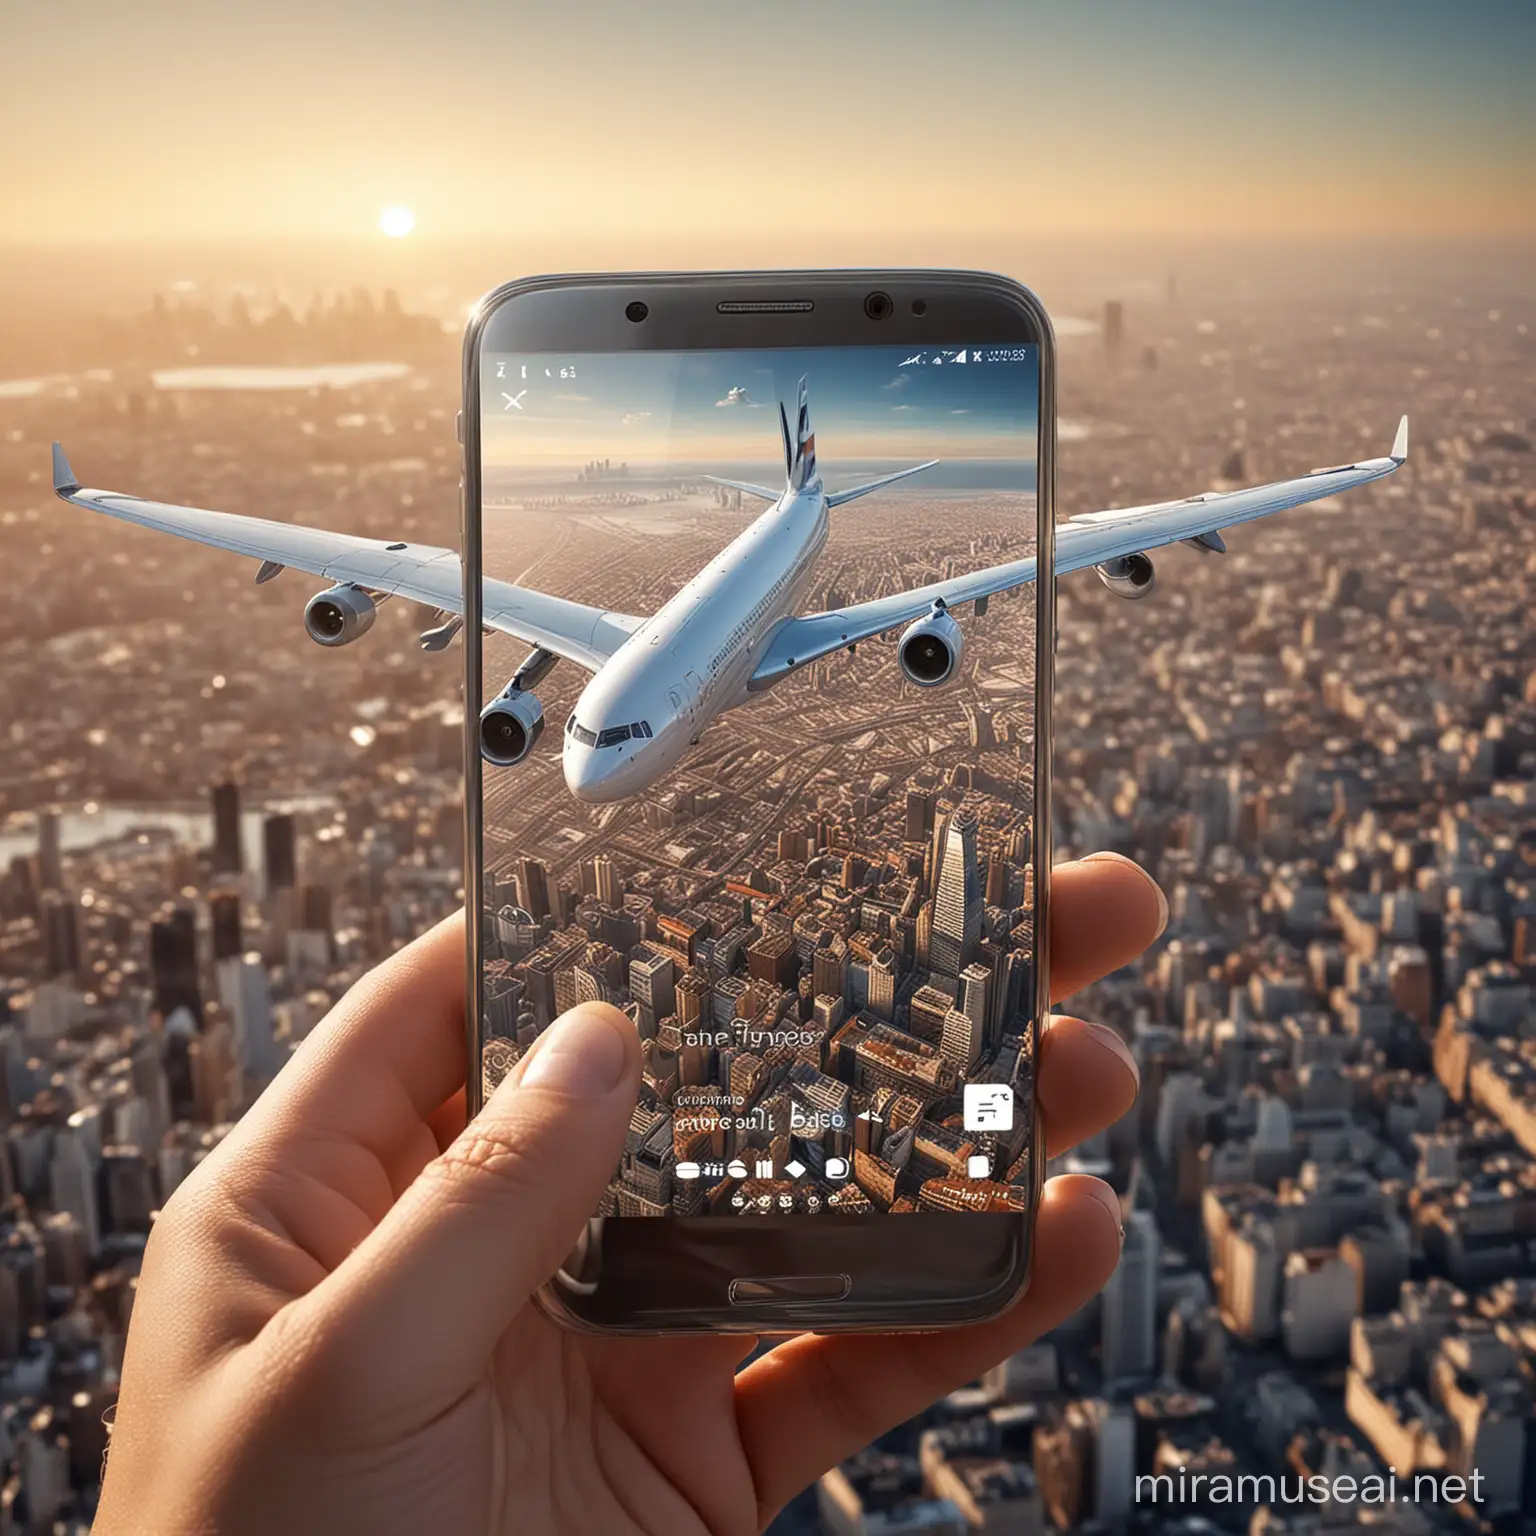 Create a highly stylized digital artwork that seamlessly blends a smartphone and a commercial airliner into one object. The smartphone's screen is to display a futuristic city skyline, indicating a travel theme, with the branding “Air France” prominently featured. The body of the airplane should emerge from the smartphone, suggesting they are one entity, to symbolize the intersection of advanced technology and luxury air travel. The style should be surrealistic and glossy, with a high degree of shine and reflection. The lighting should be dramatic, with a golden hue reminiscent of sunrise or sunset, adding to the premium feel of the composition. The background should be a gradient of soft white to highlight the silhouette of the combined objects, 32k render, hyperrealistic, detailled.